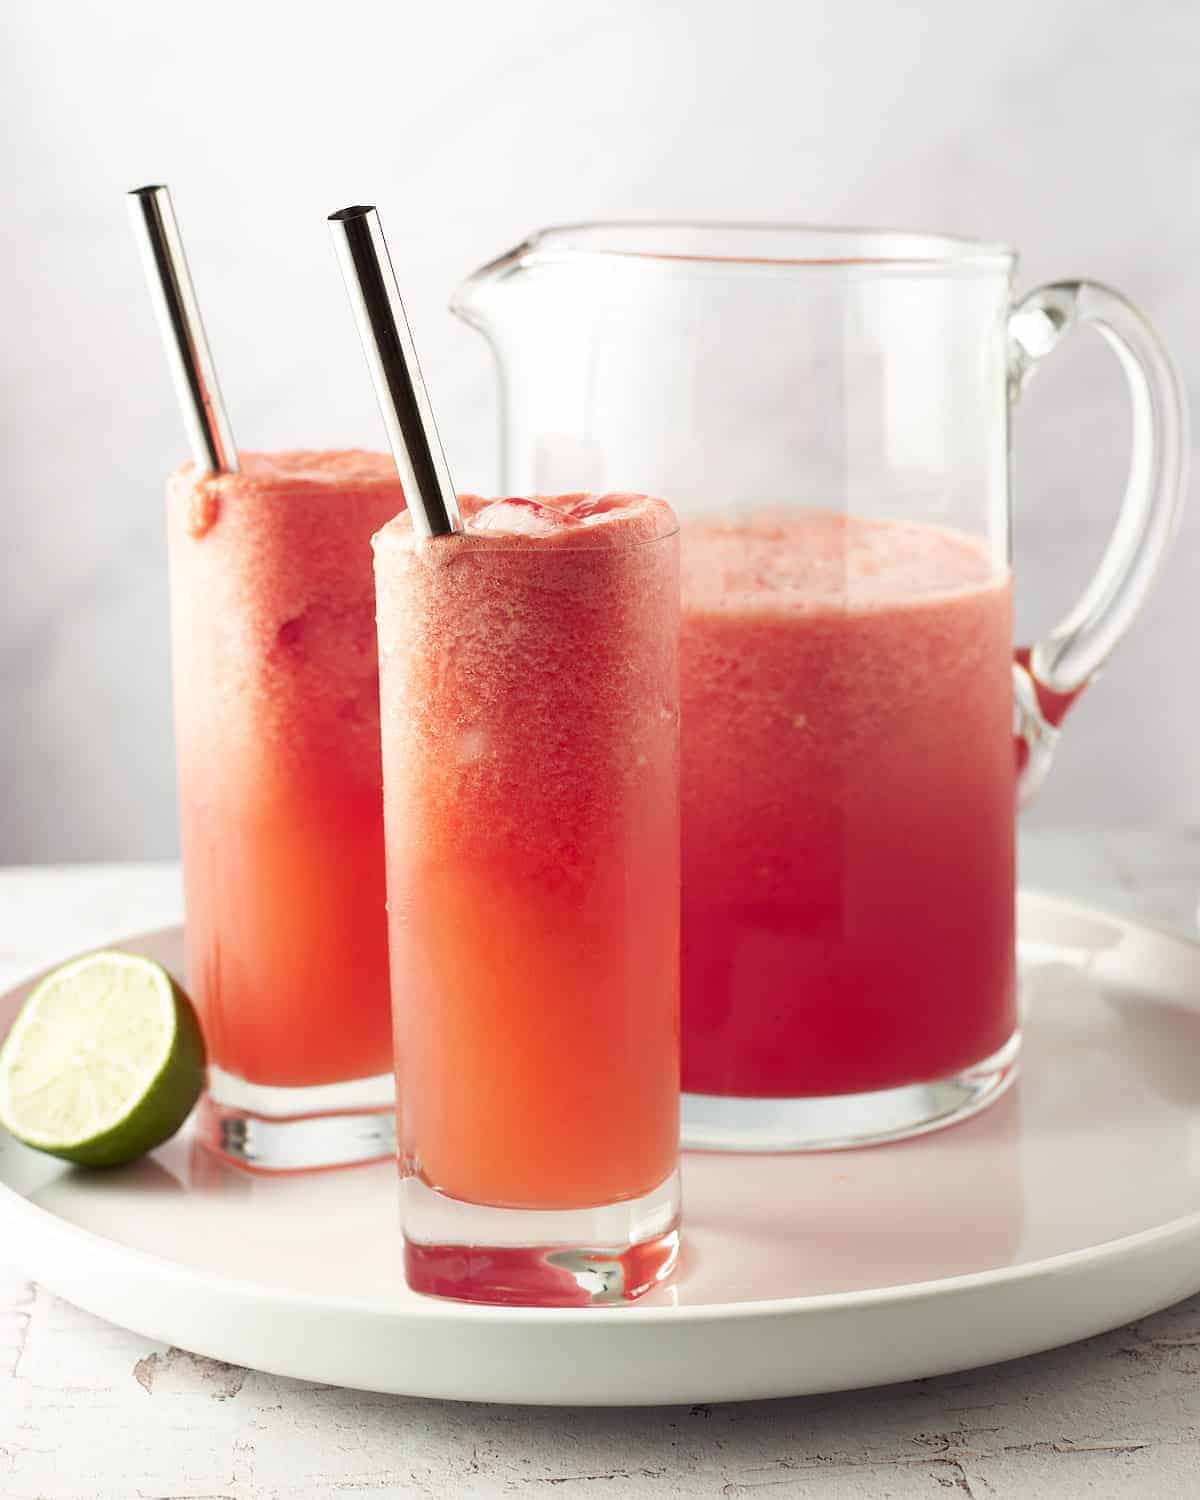 Two glasses of watermelon juice, perfect for summer refreshment.